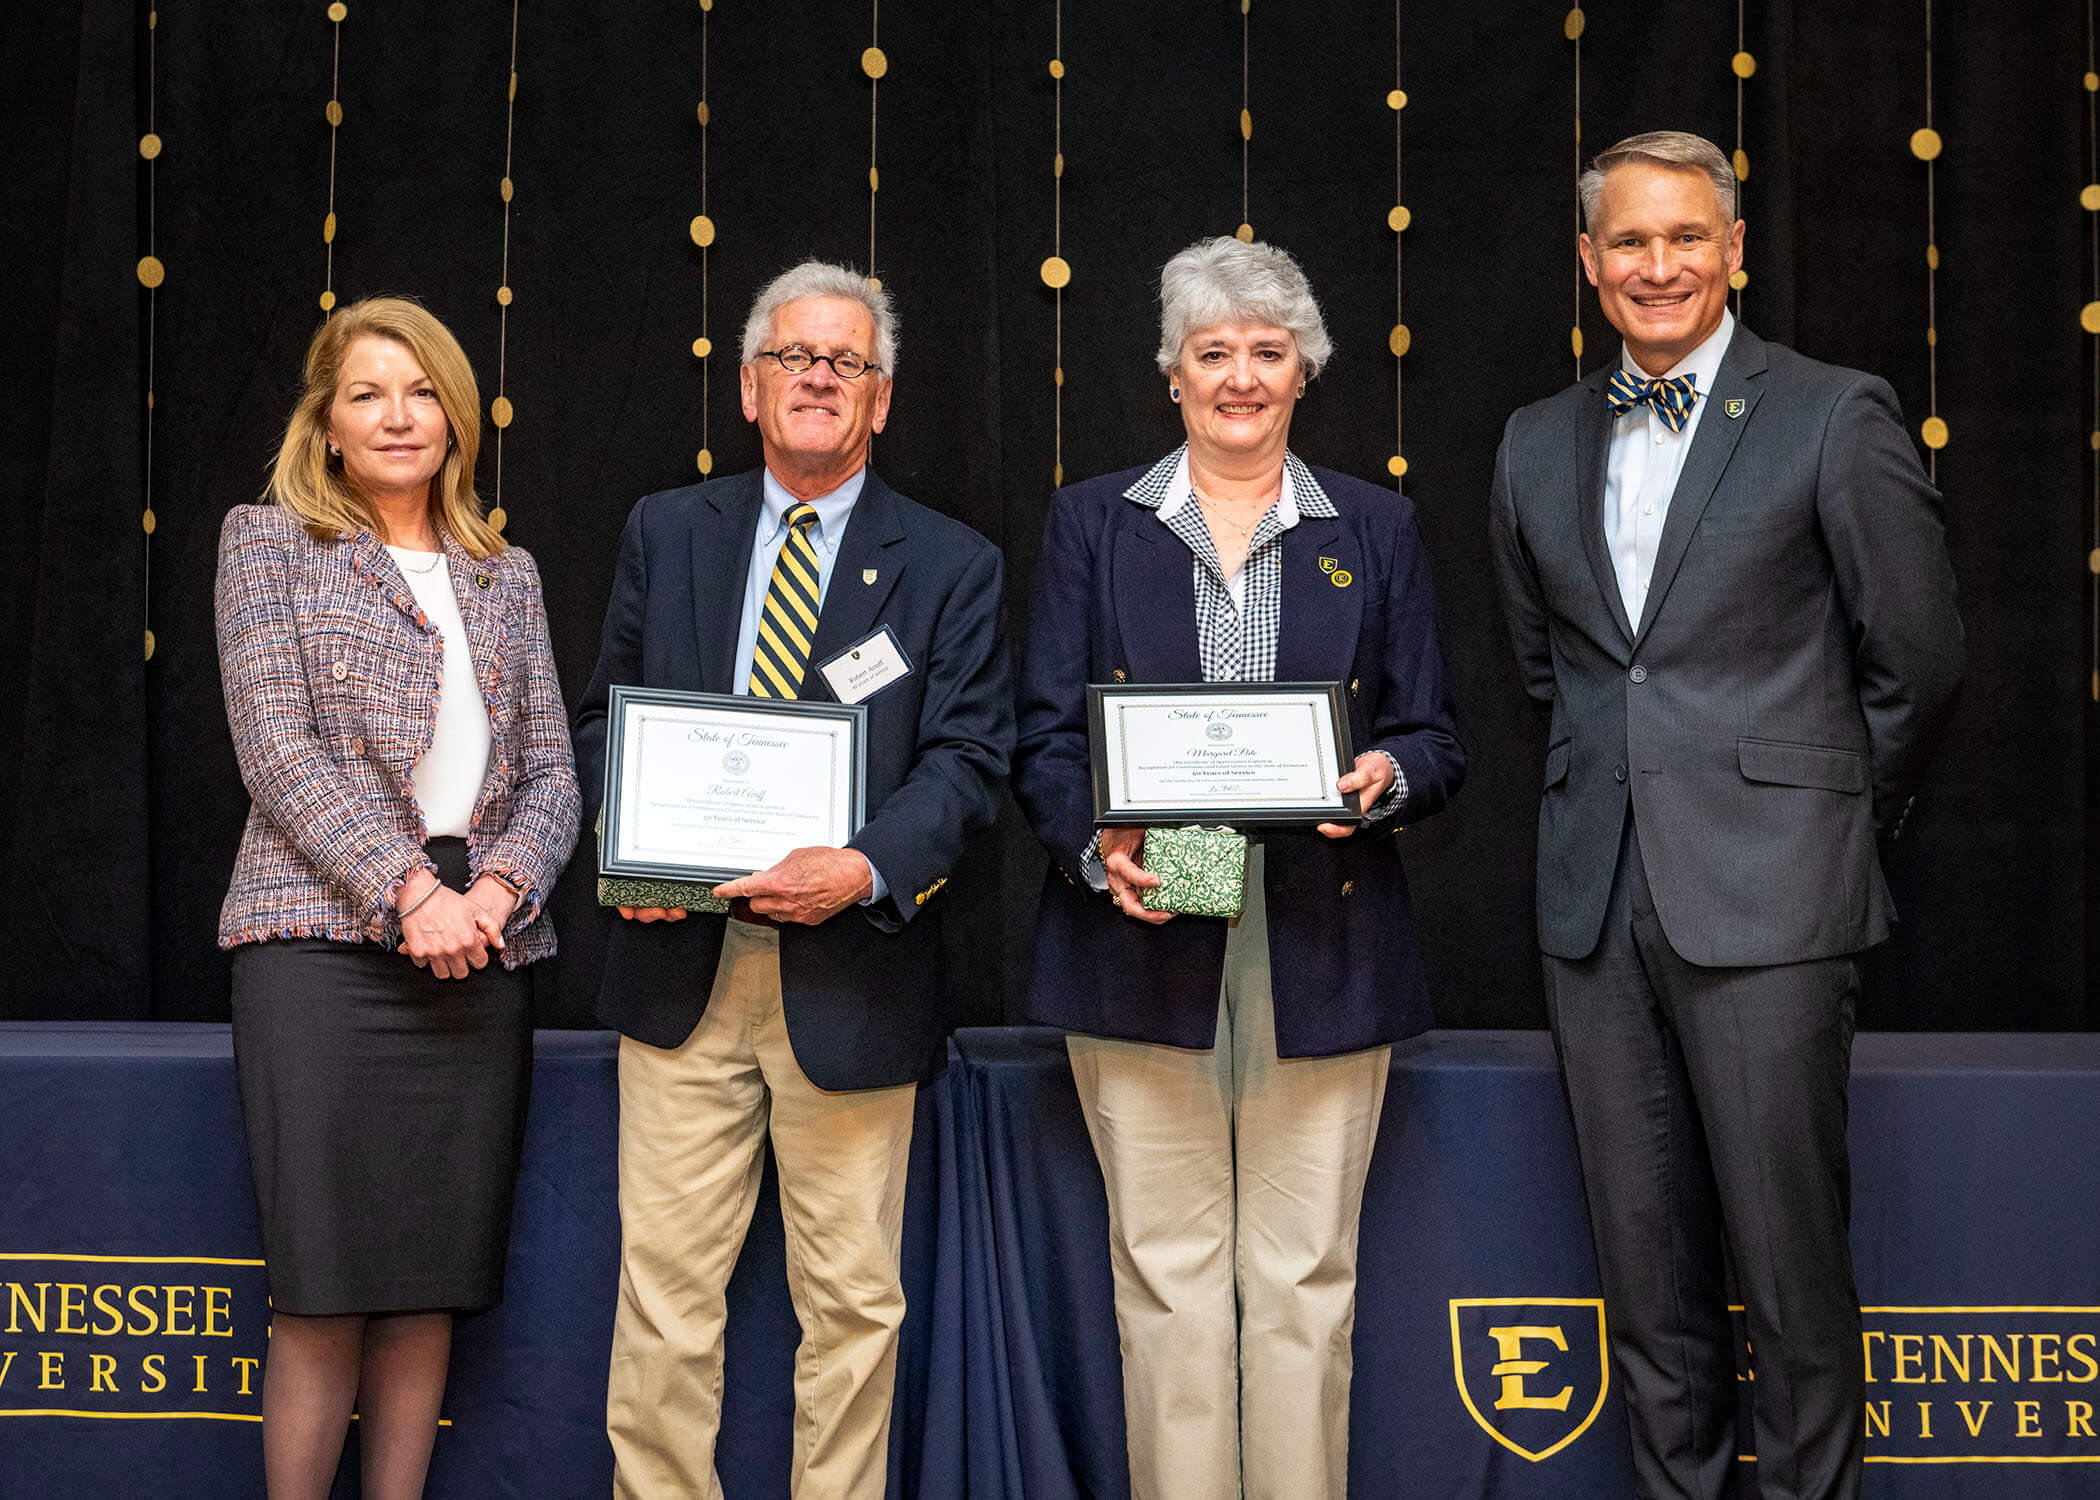 Robert Acuff and Margret Pate both receive awards for 40 years of service.